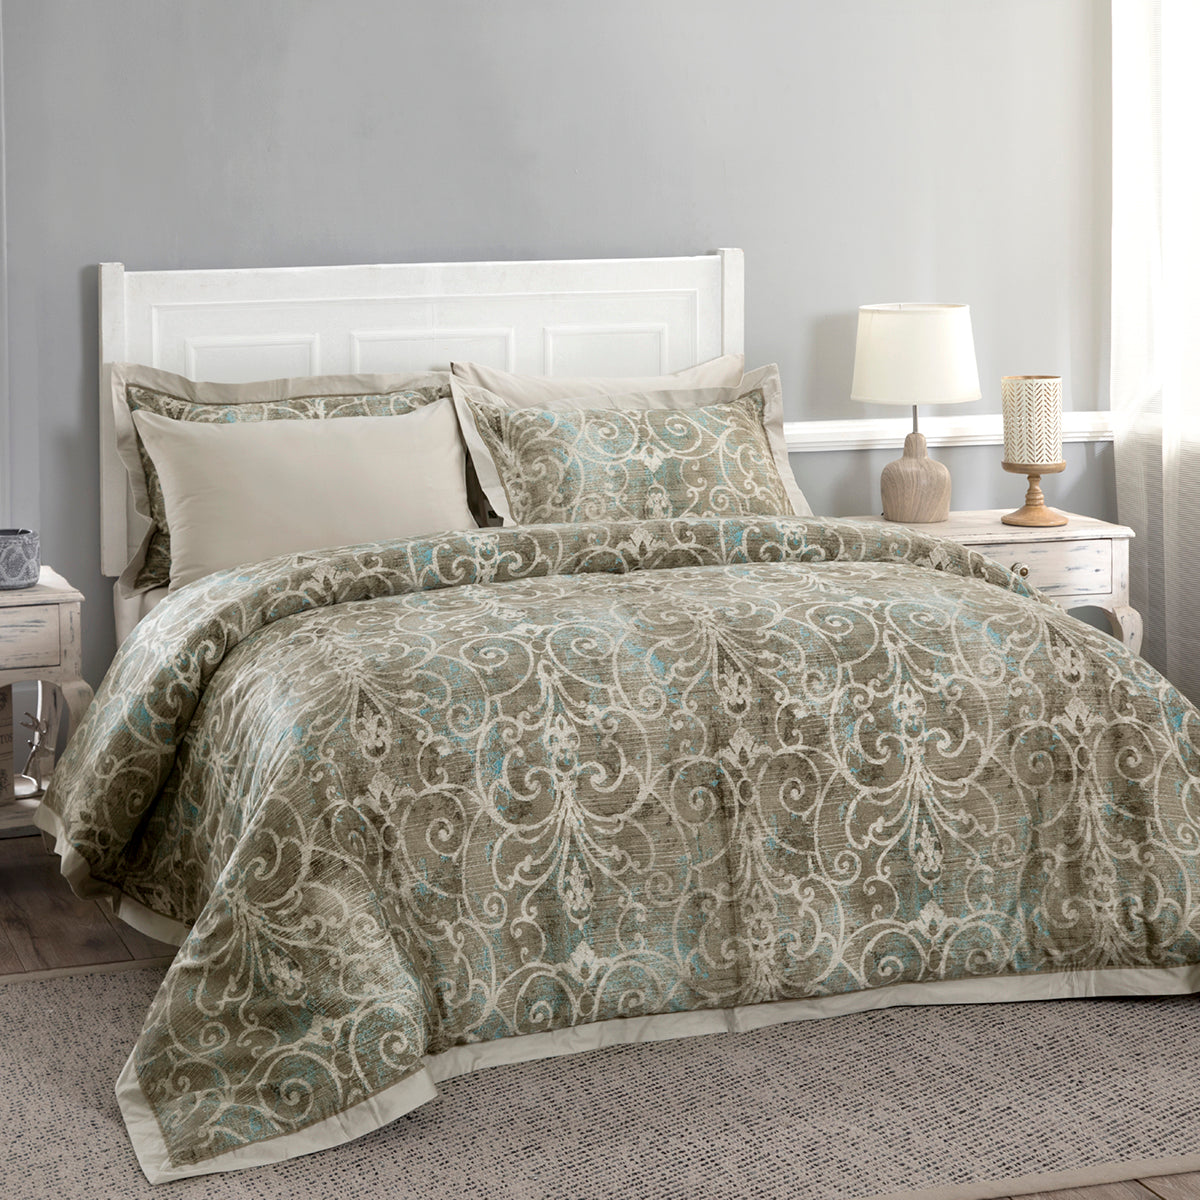 Unraveled Fer Forge Plain & Printed Reversible 100% Cotton Super Soft Neutral Duvet Cover with Pillow Case